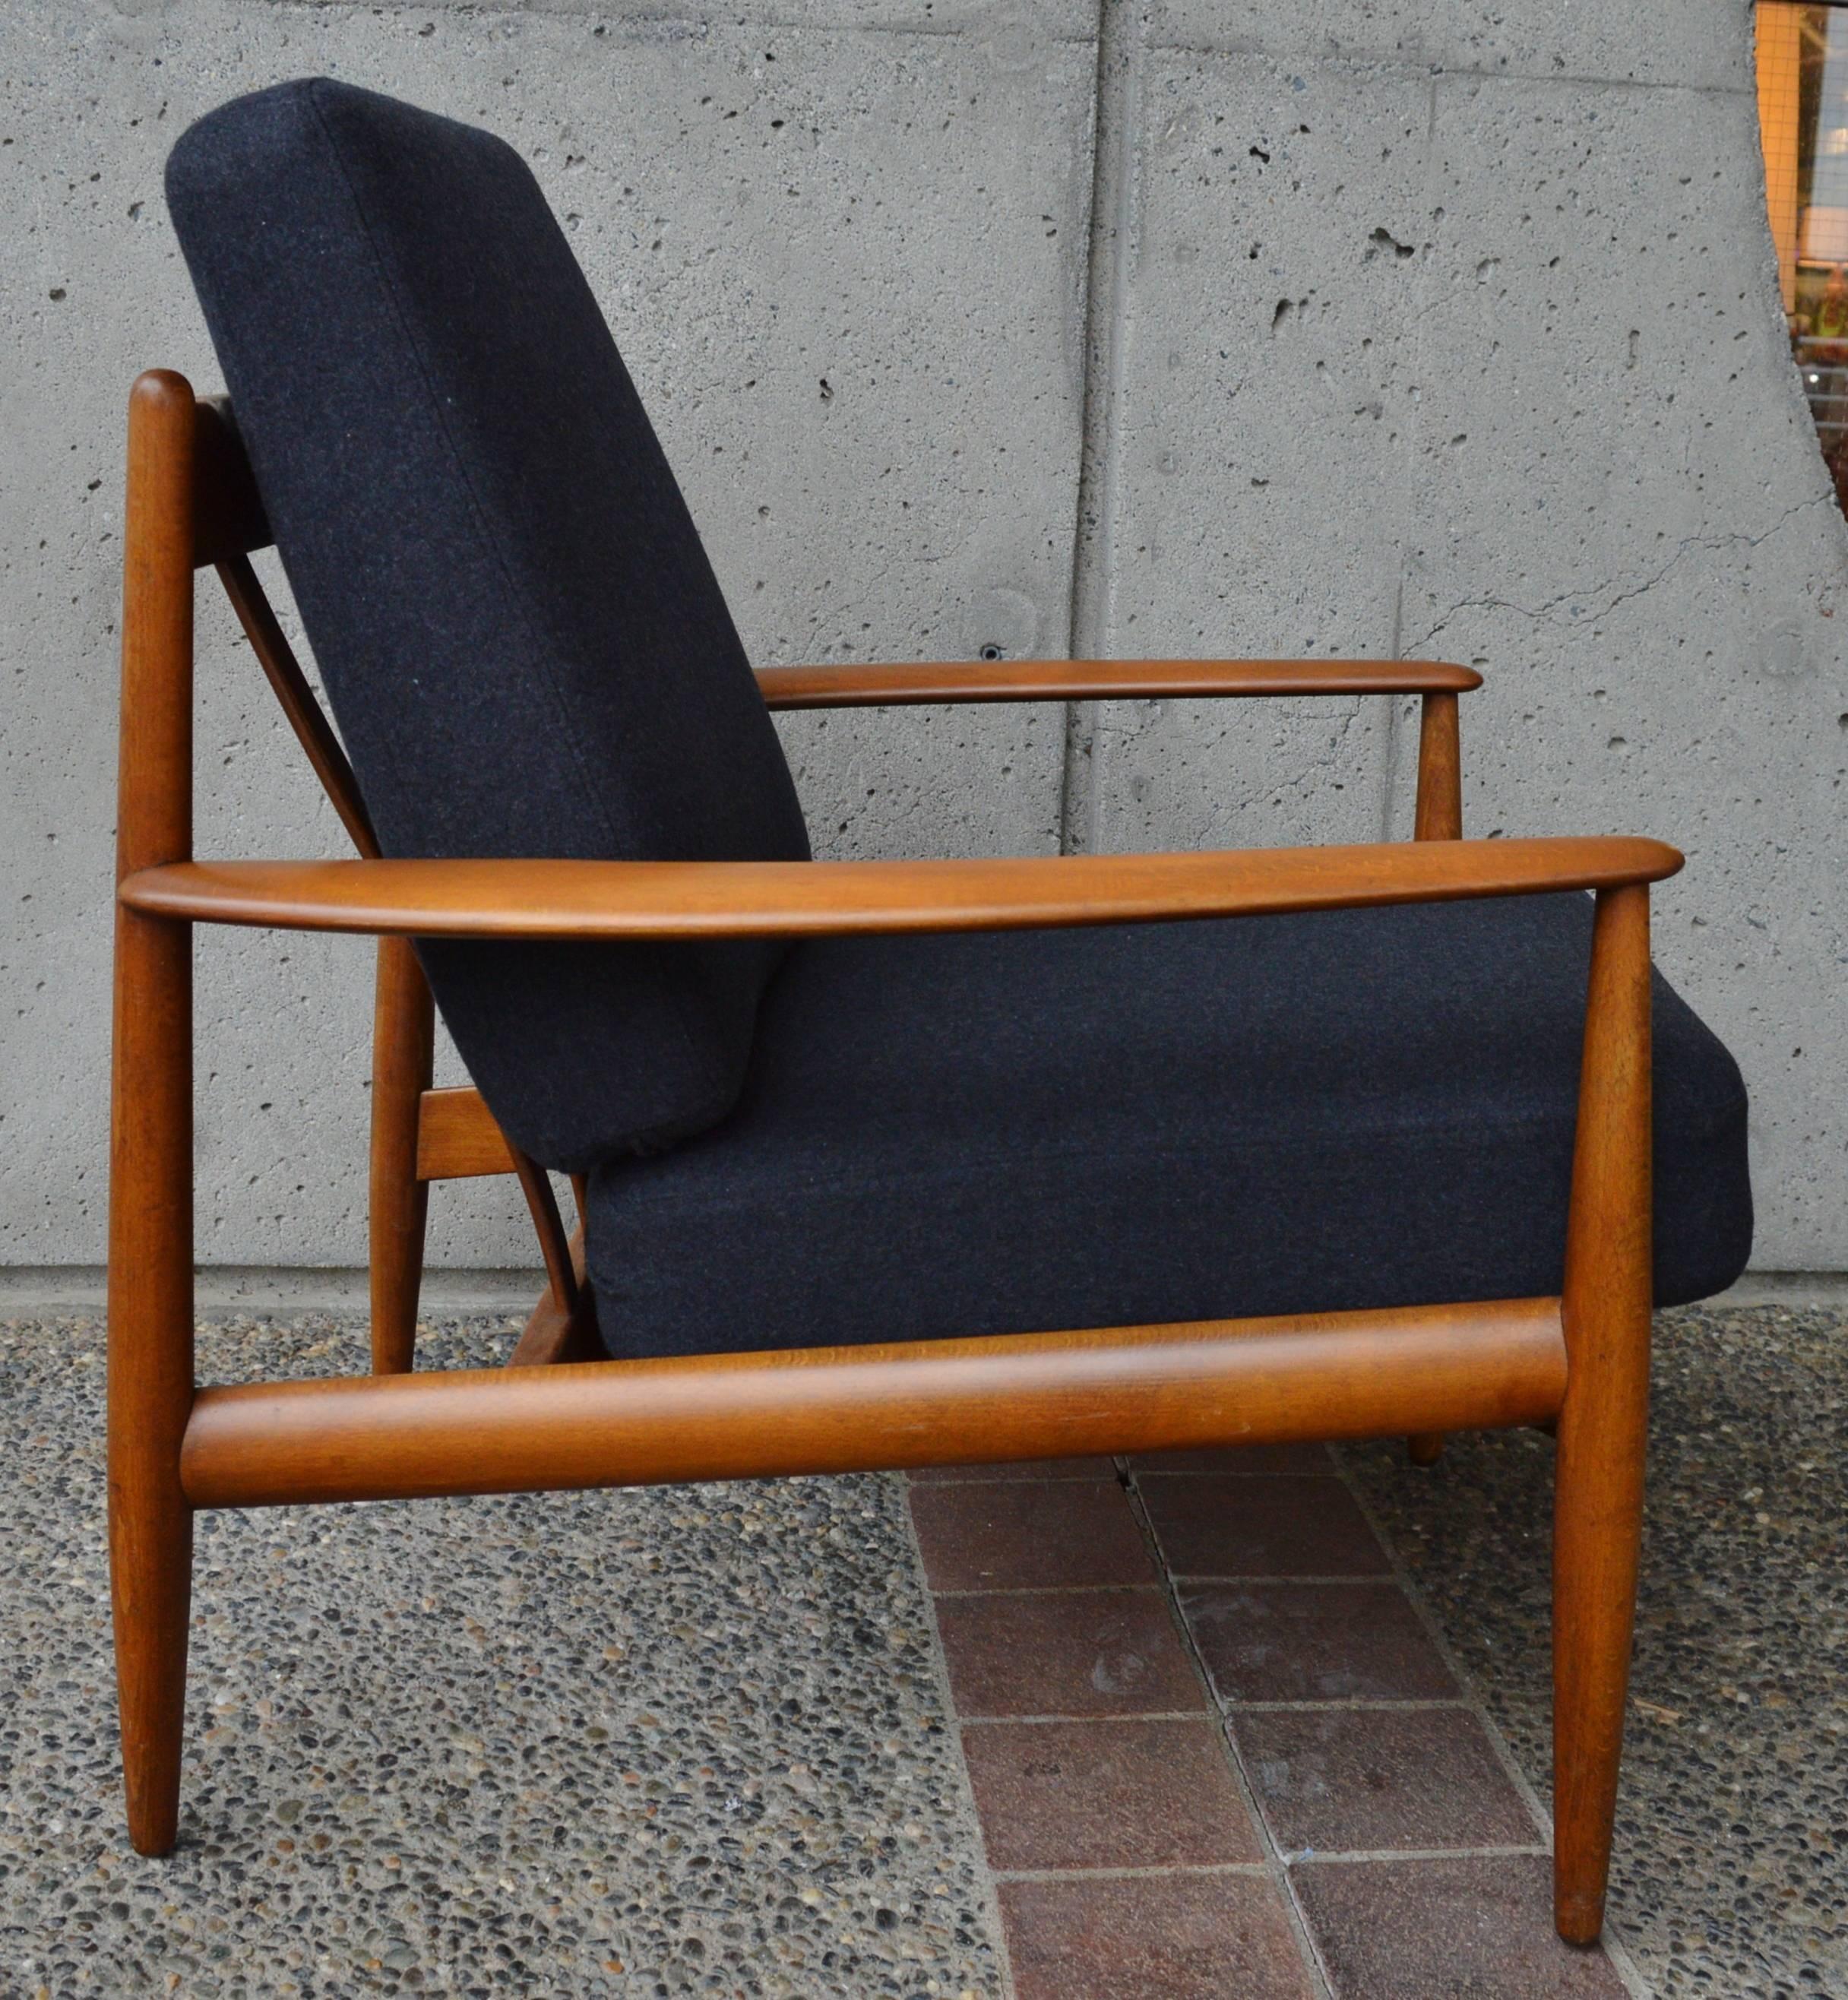 This gorgeous Danish modern beech frame lounge chair has a rich, warm toned patina and is an early 1950s design by Grete Jalk for France & Daverkosen. Featuring the version with the contoured back slats, flared paddle arms and sculptural detailing